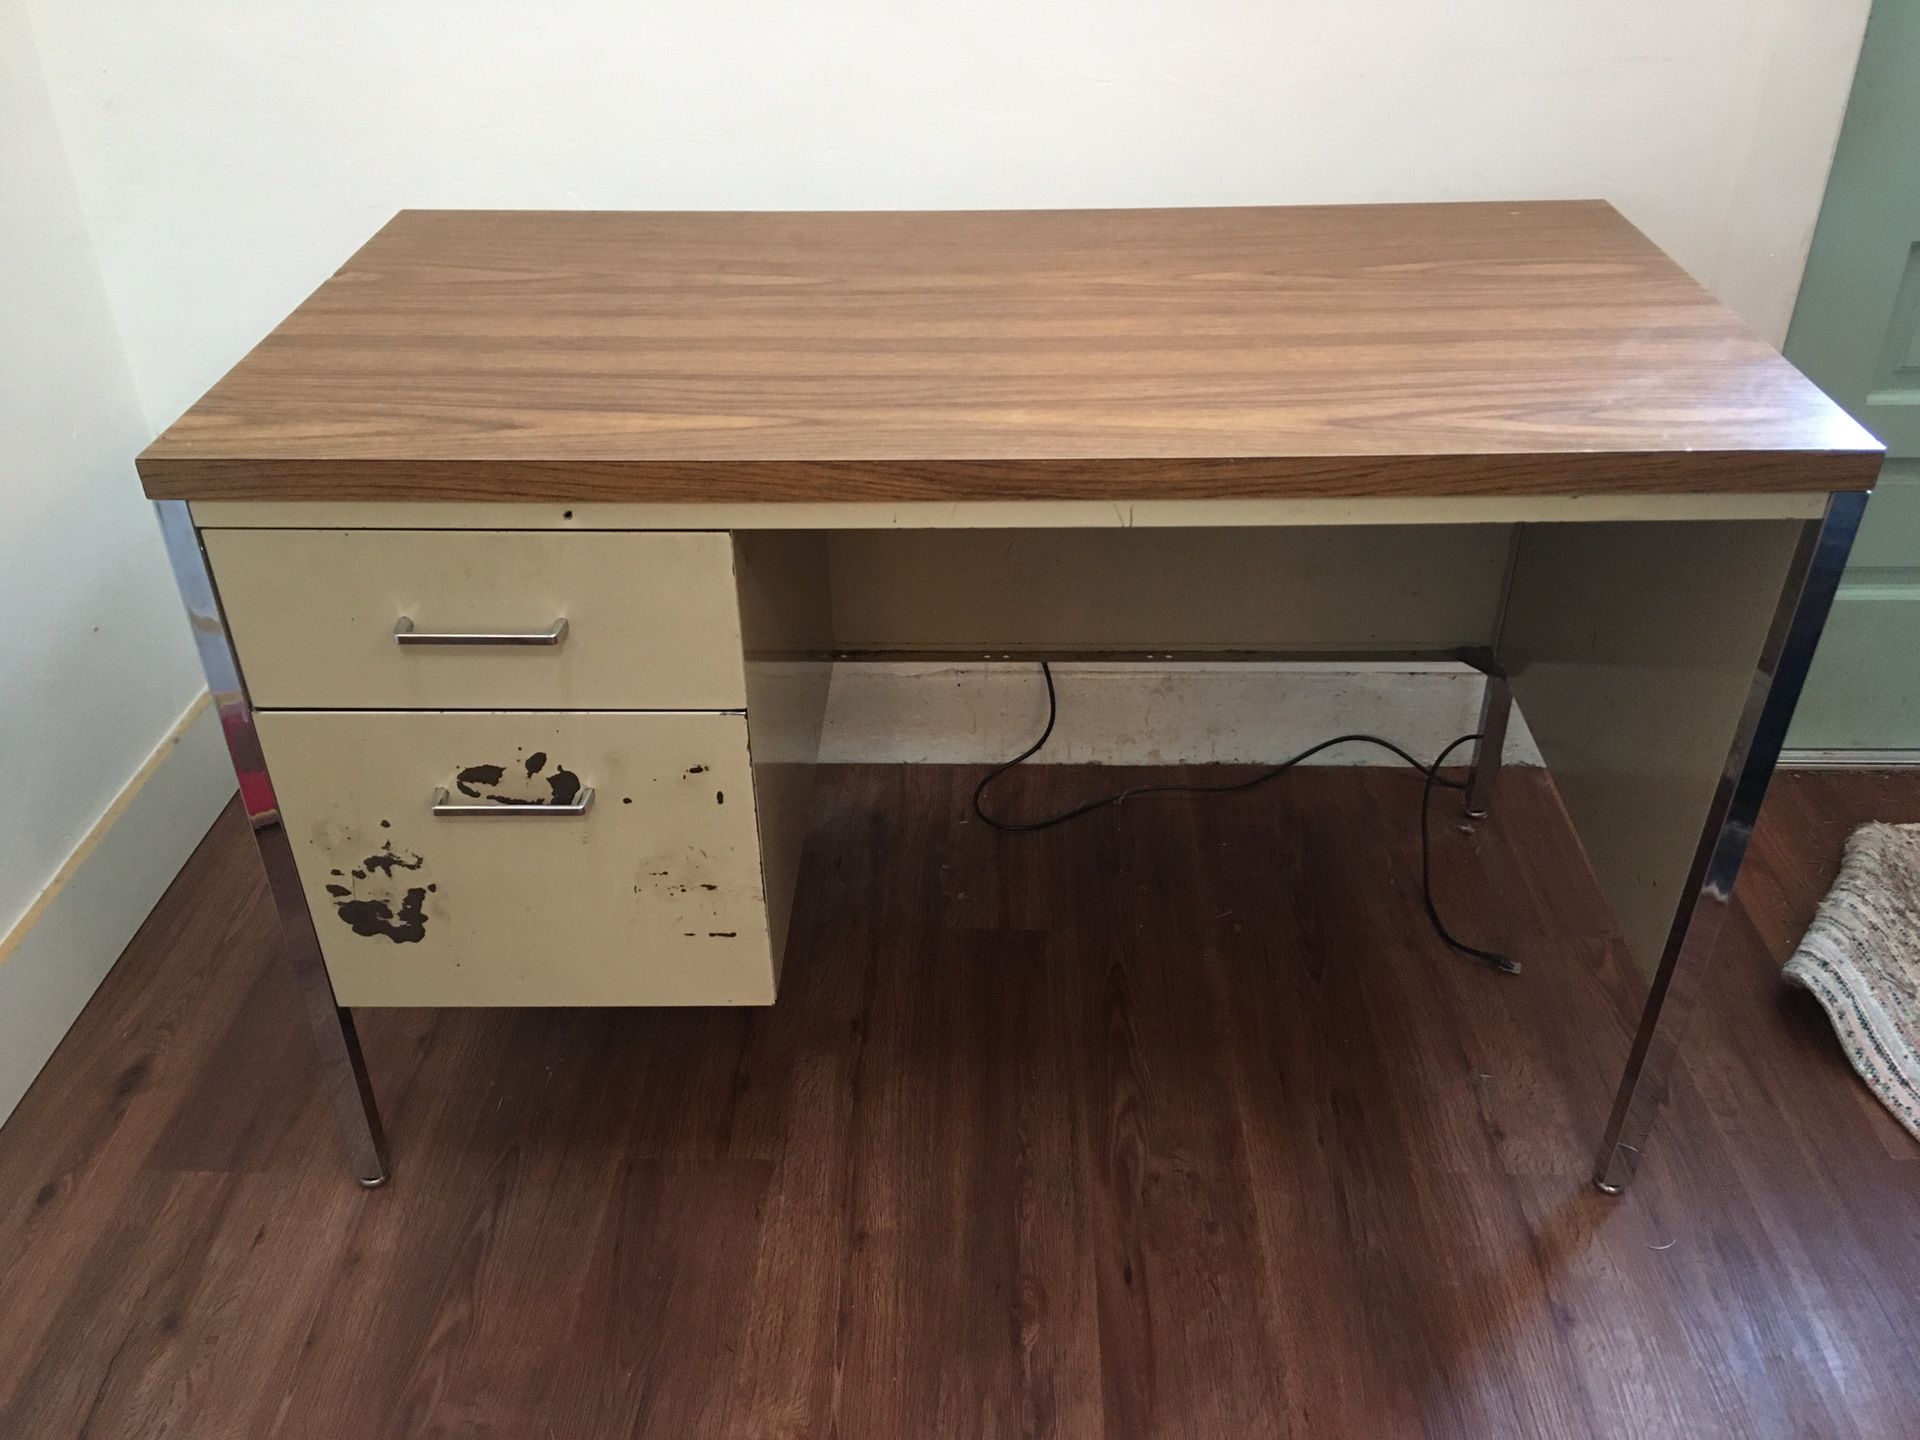 Free Metal Desk- A Great Project for Someone! Located In Steilacoom